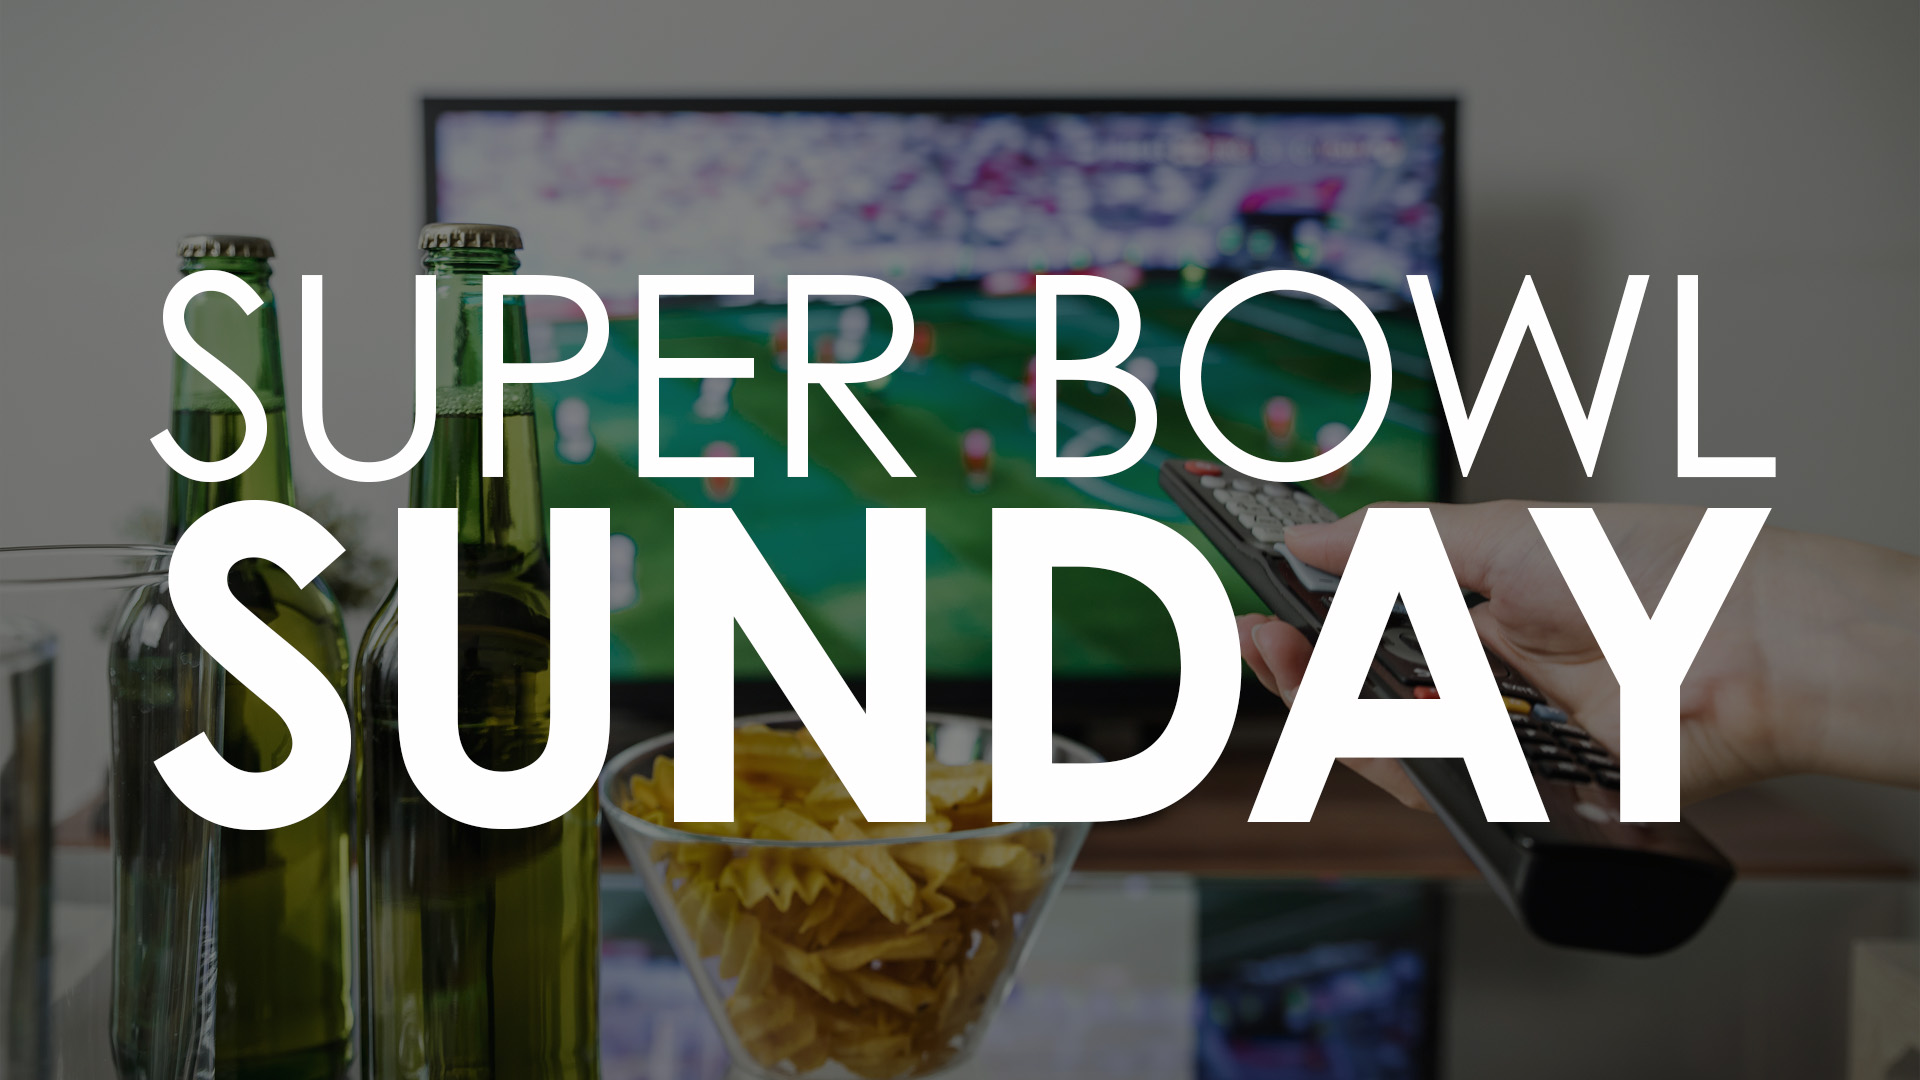 White "Super Bowl Sunday" spanned across the screen with a photo in the background of two glasses, a bowl of chips, a remote in hand, and the tv displaying some football.